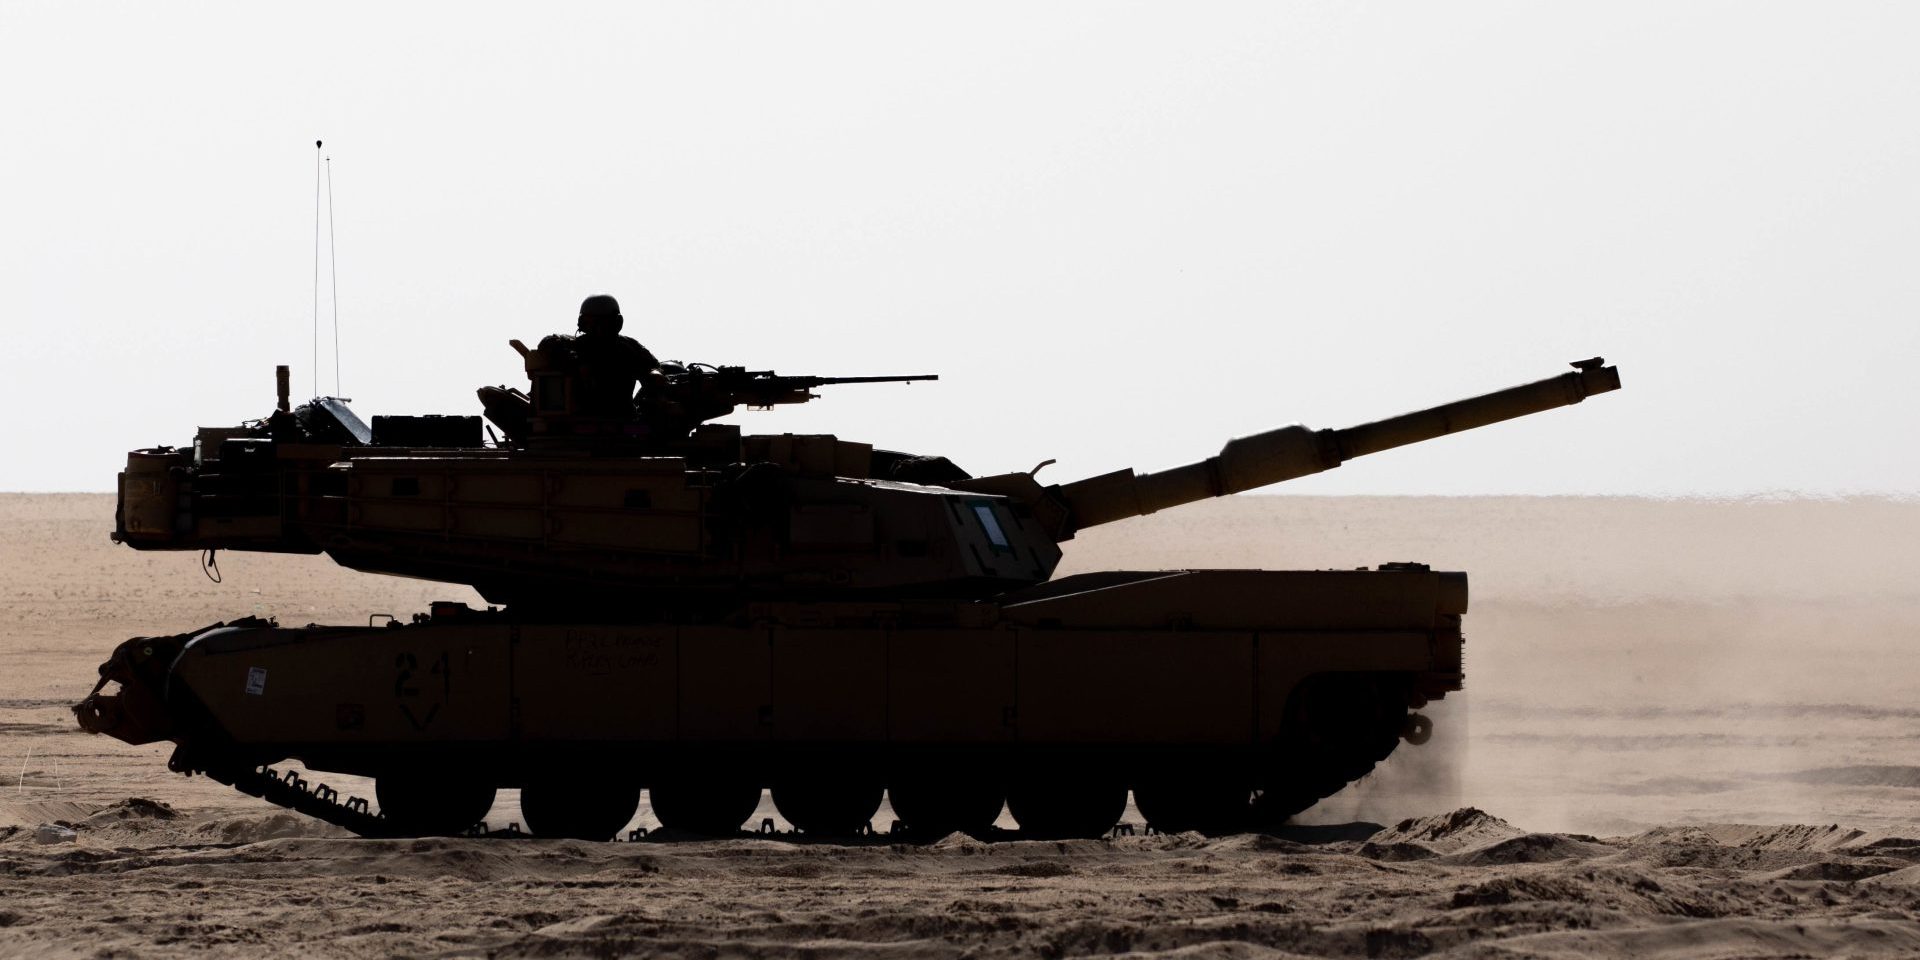 Soldiers move an M1 Abrams tank to the firing line to test fire its weapons during operations at the Udairi Range, Kuwait, May 3, 2021.

Photograph courtesy of the U.S. Department of Defense